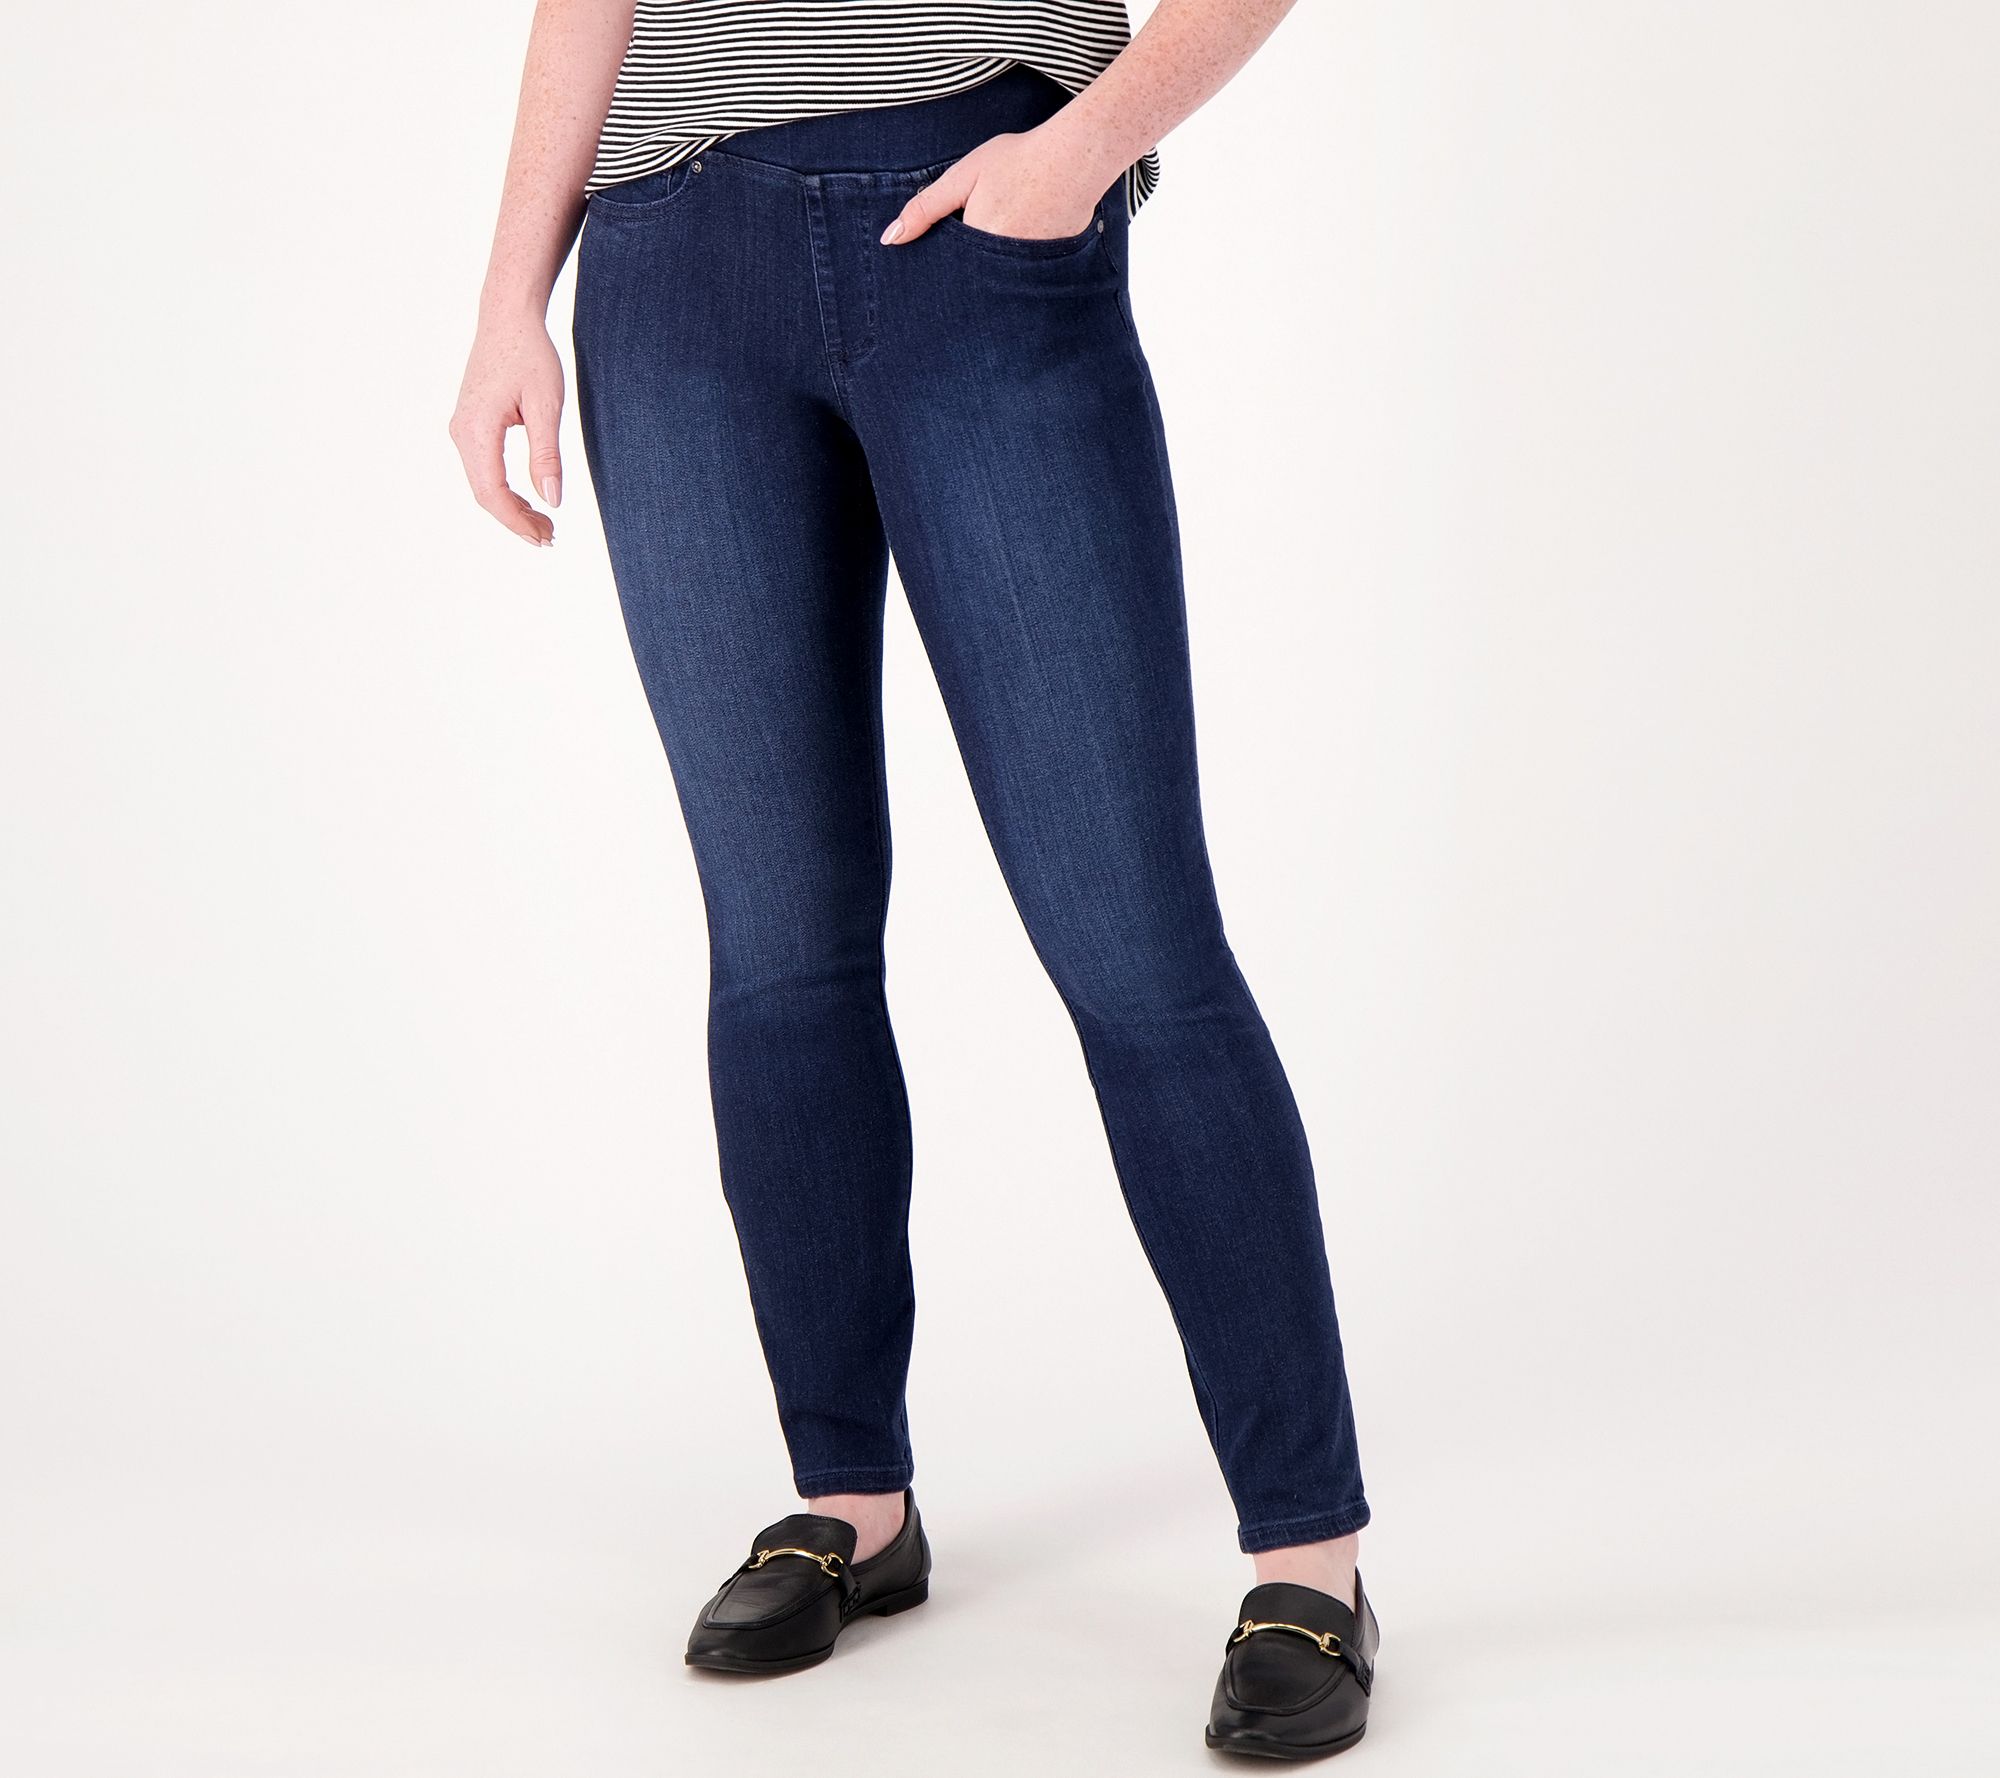 Denim & Co. Active Duo Stretch Tall Crop Leggings with Pockets 